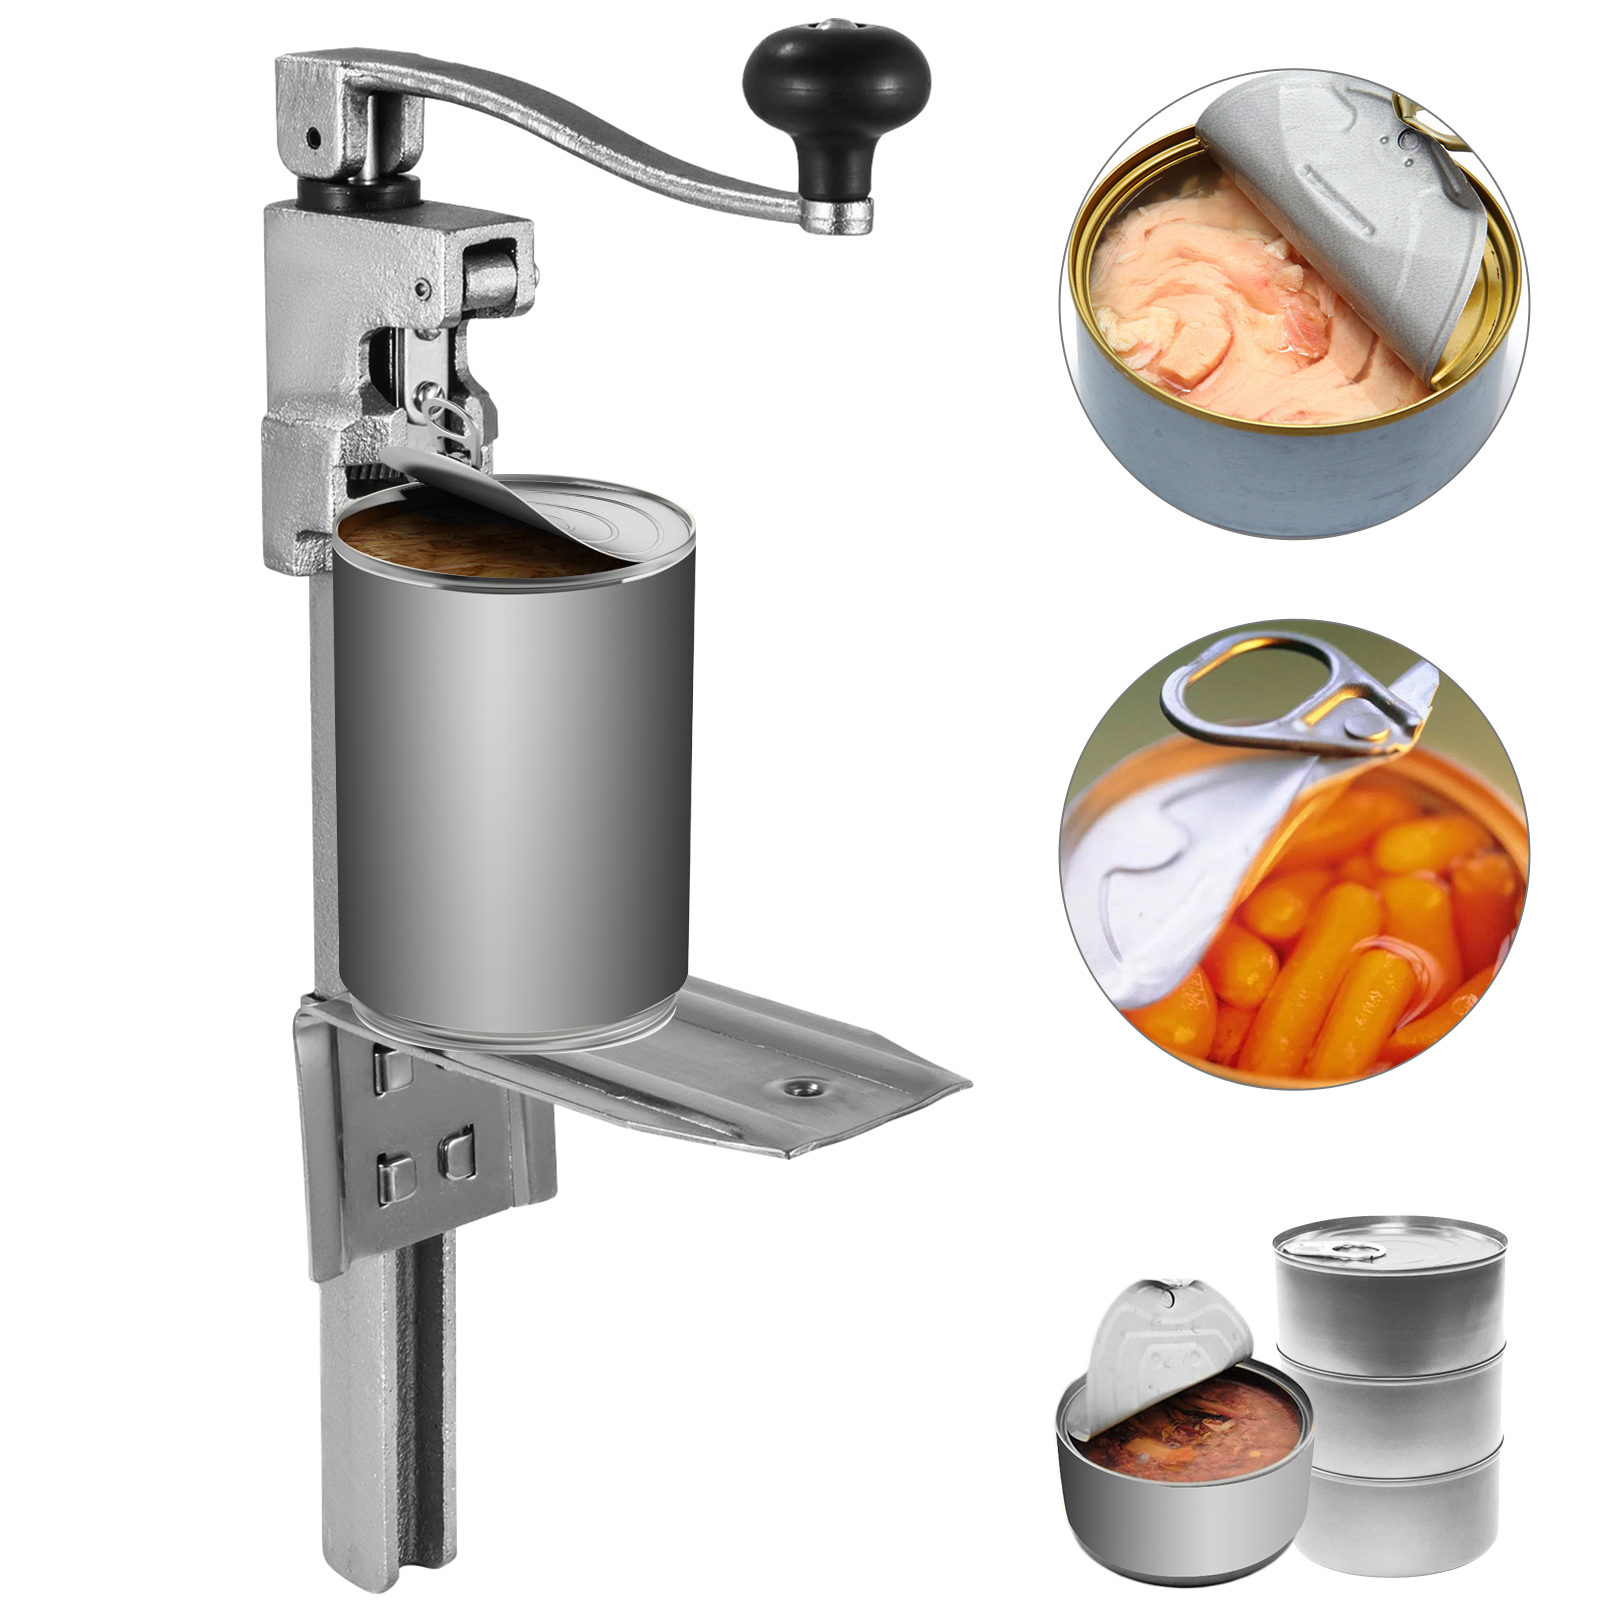 Reliable Manual Can Opener With Plated Steel Base от Vevor Many GEOs